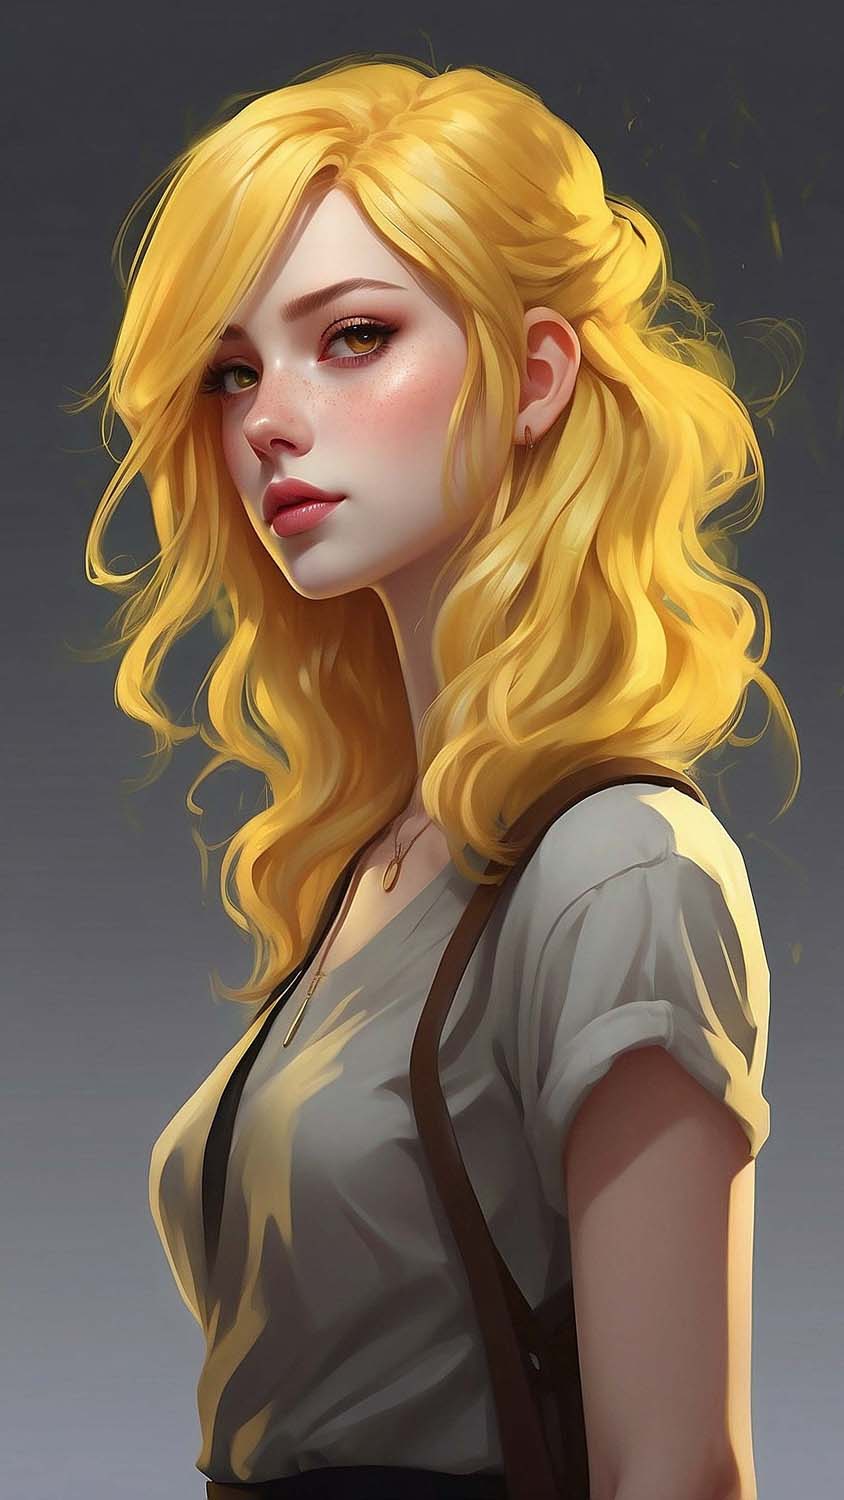 Girl with Golden Hairs iPhone Wallpaper